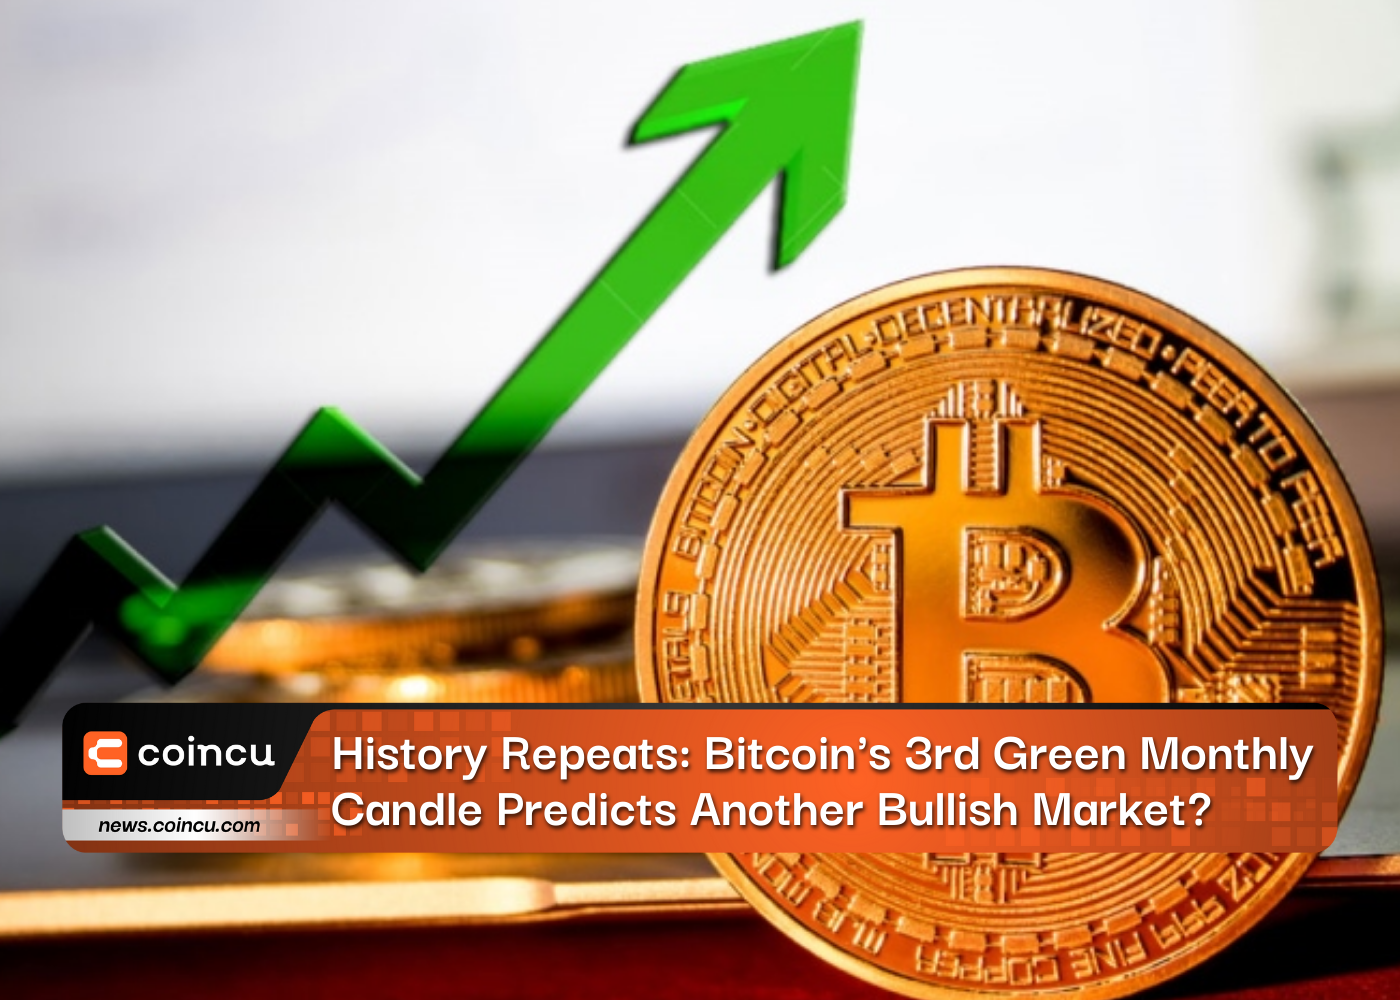 History Repeats: Bitcoin's 3rd Green Monthly Candle Predicts Another Bullish Market?